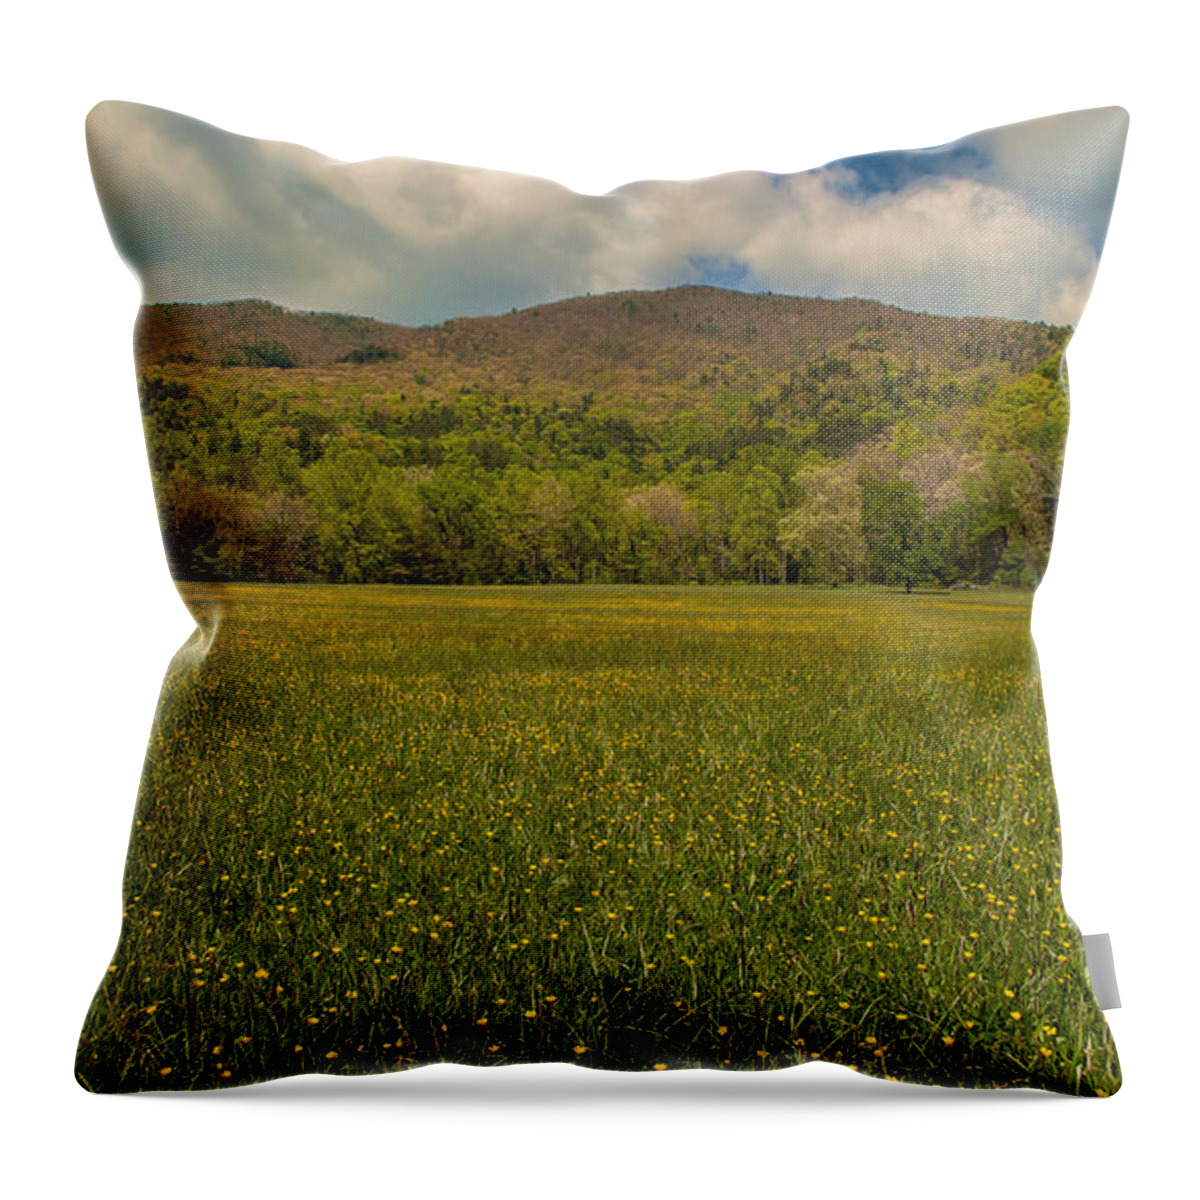 Great Smoky Mountains Throw Pillow featuring the photograph Cades Cove Buttercup Field by Brenda Jacobs